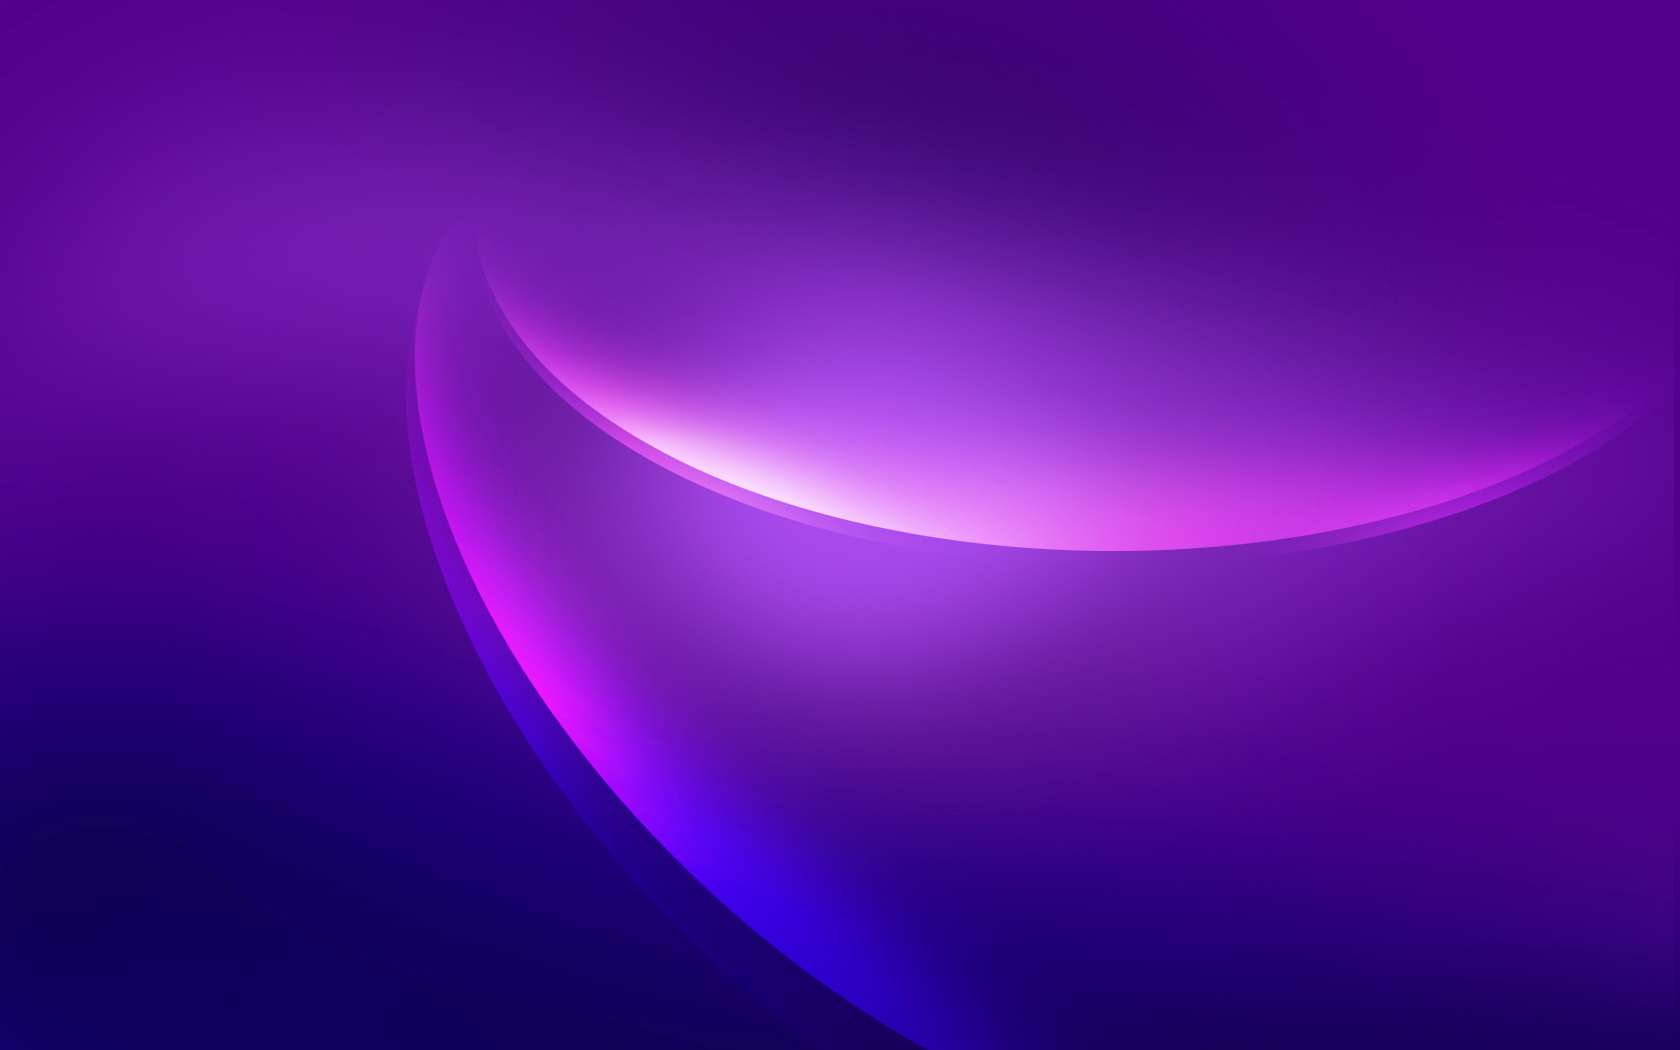 Wallpaper  abstract digital art minimalism windows 11 dark background violet  color simple background 3840x2160  andy19esp  2234736  HD Wallpapers   WallHere